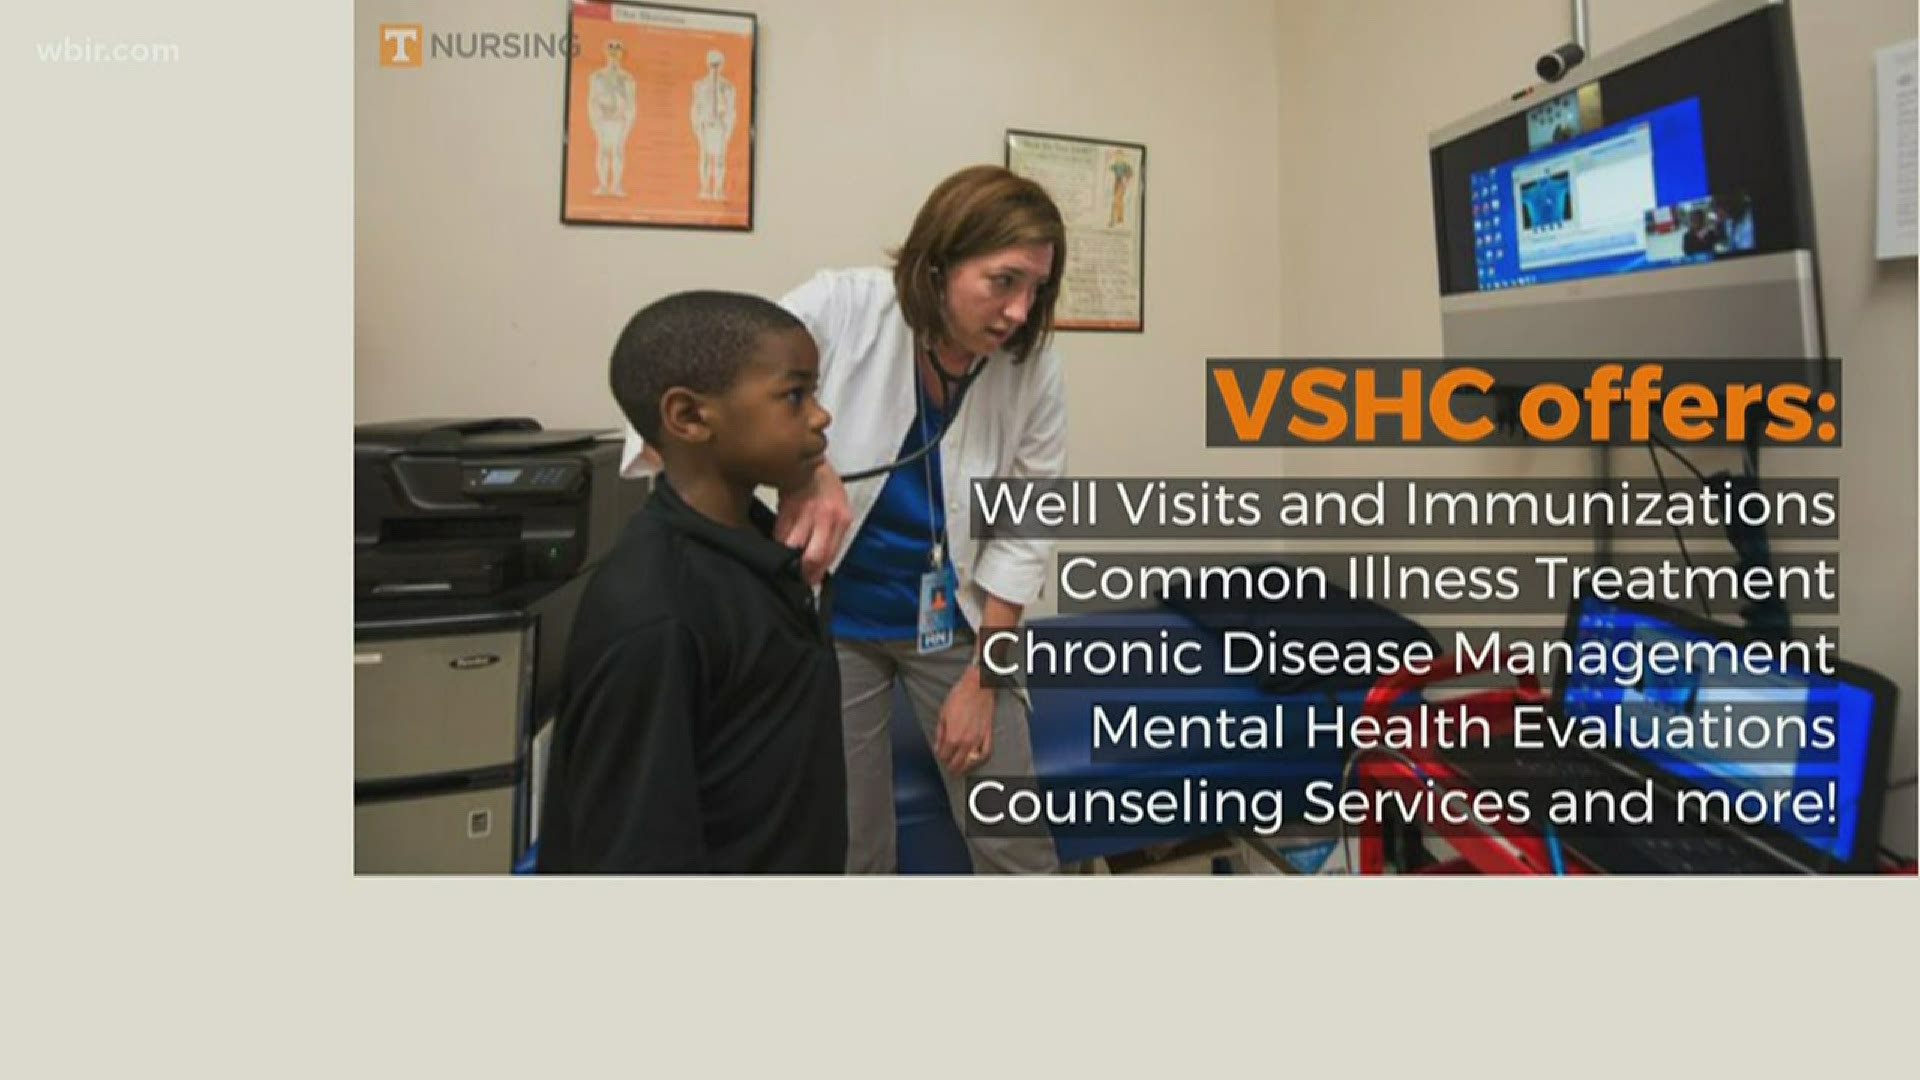 Vine School Health Center is a school-based physical and mental health center located in the Langland Building of the Vine Middle Magnet School in Knoxville.